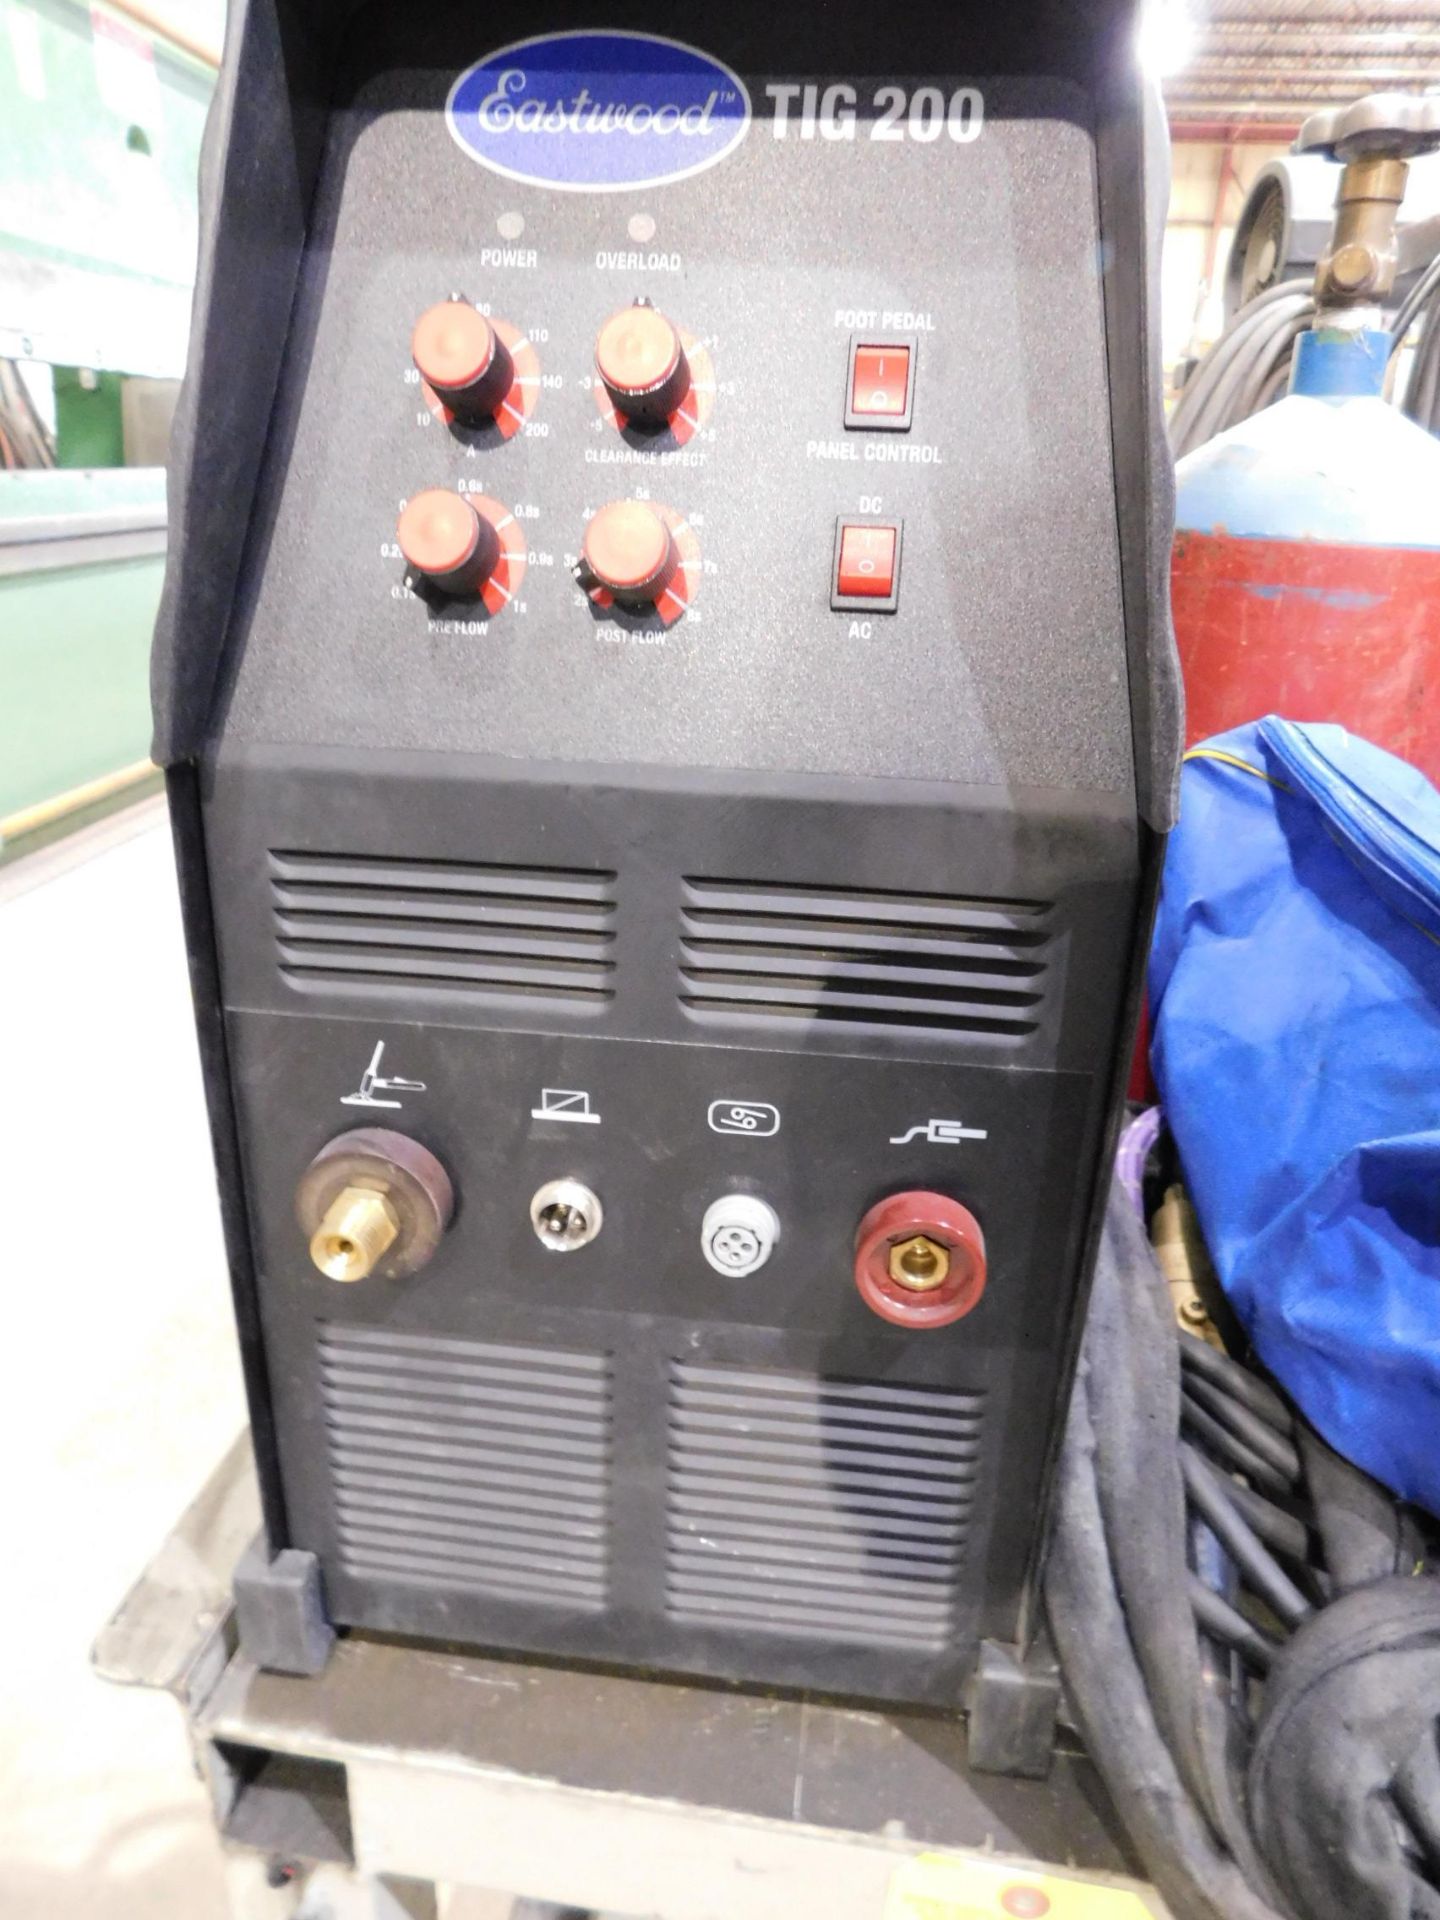 Eastwood TIG200 Portable Tig Welder, s/n 66103120303042, with Torch, Ground Cable, Foot Pedal - Image 2 of 4